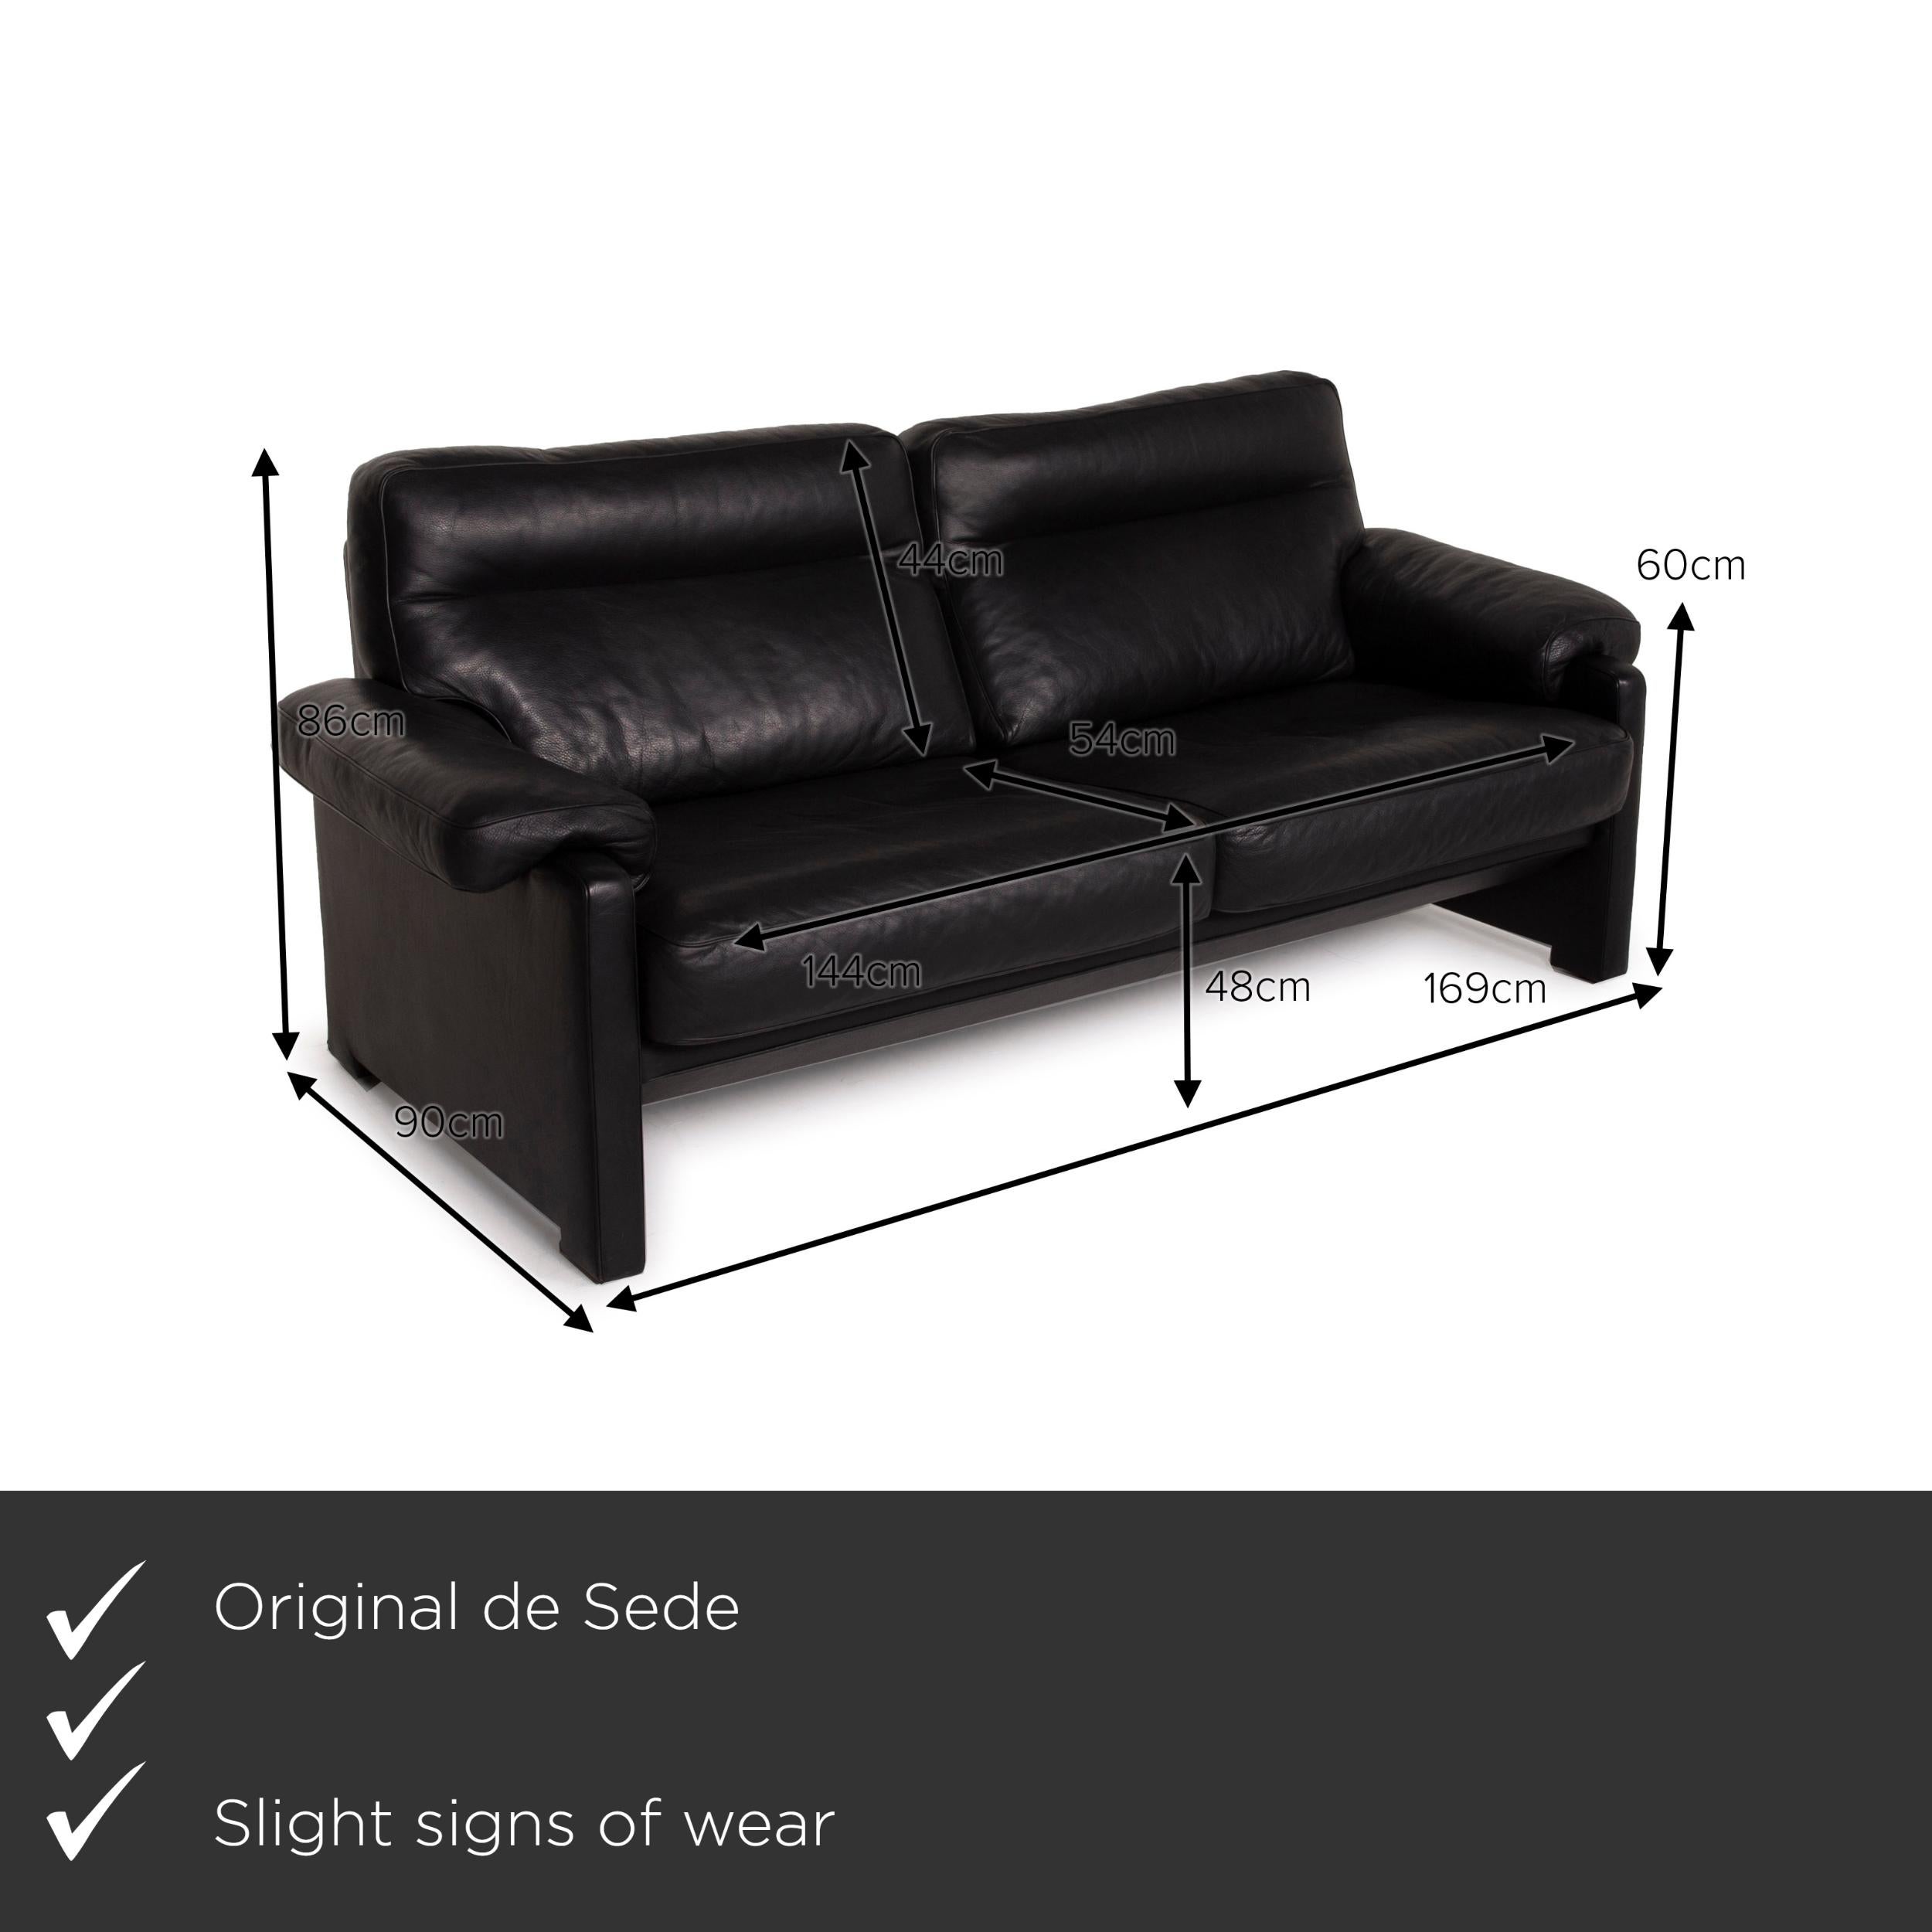 We present to you a de Sede ds 70 leather sofa set black 1x three-seater 1x two-seater set.
  
 

 Product measurements in centimeters:
 

Depth 90
Width 169
Height 86
Seat height 48
Rest height 60
Seat depth 54
Seat width 144
Back